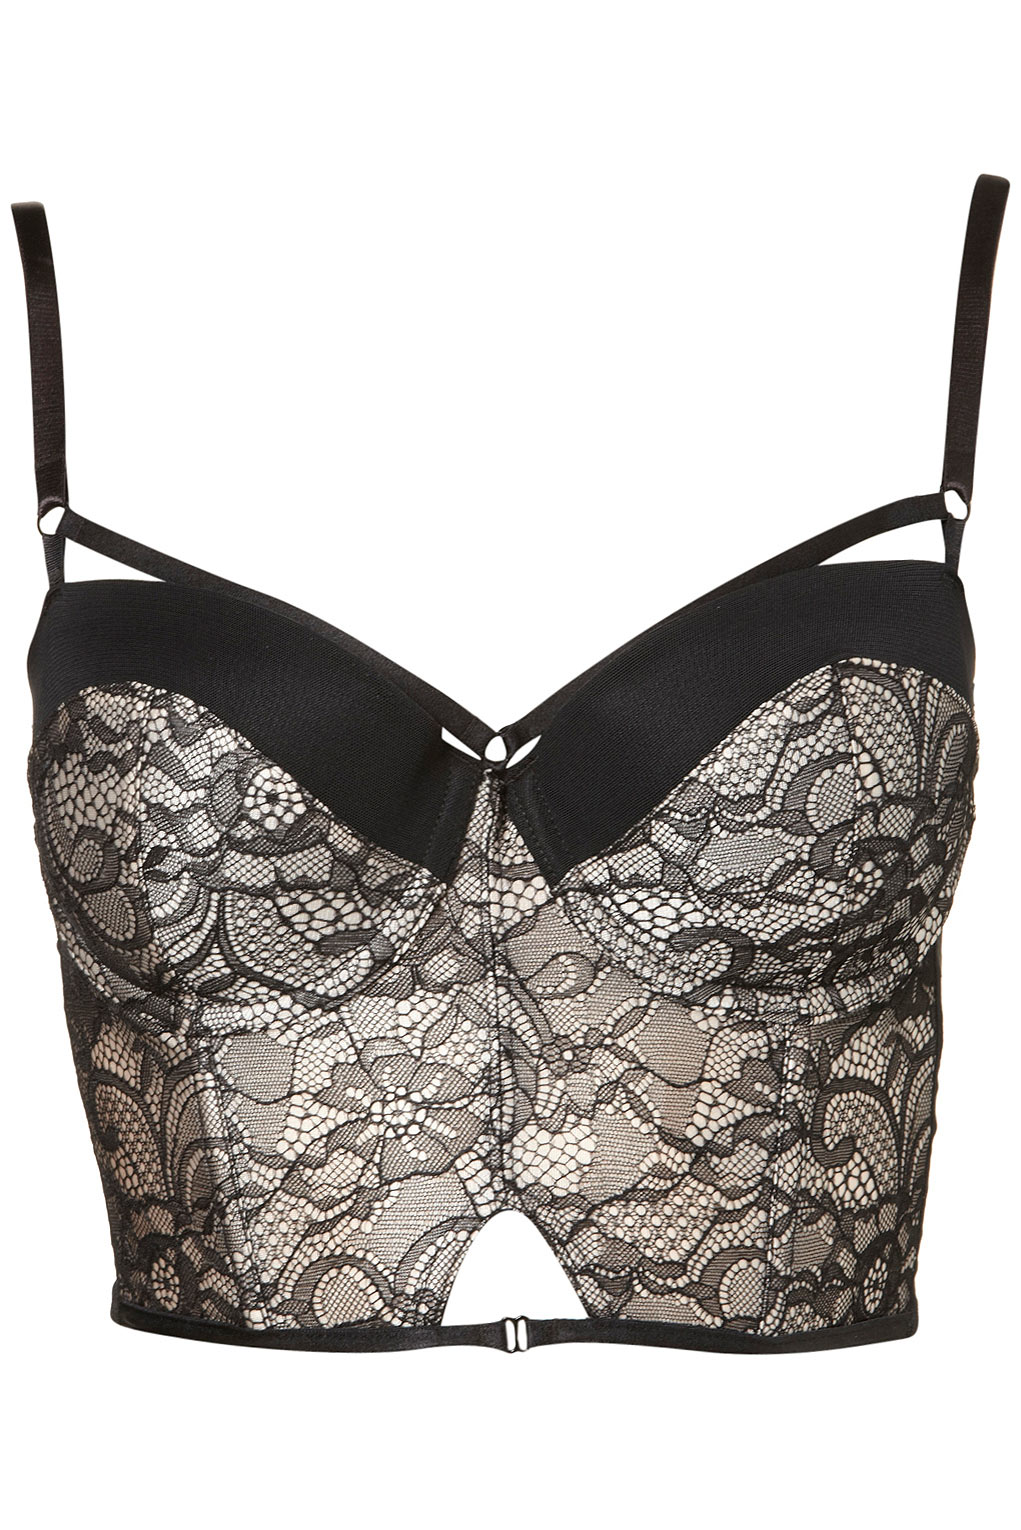 Lyst - Topshop Harness Lace Bralet in Black